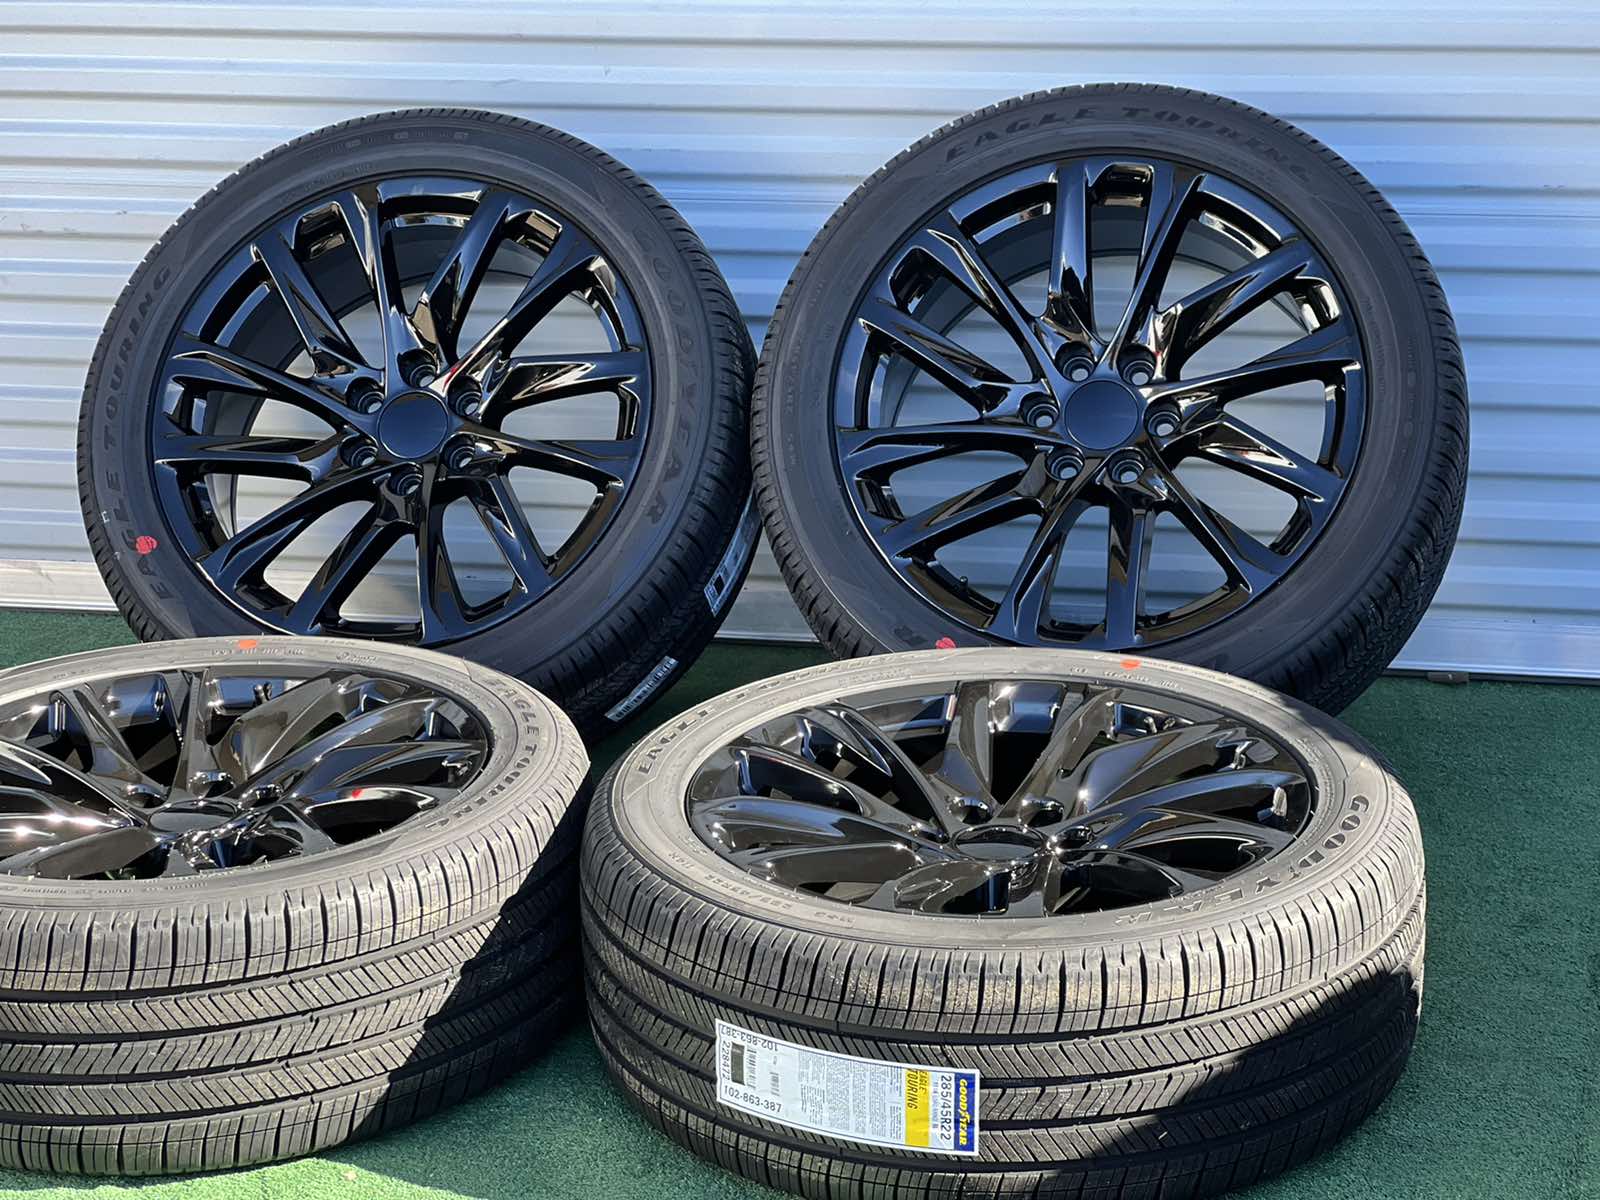 Set of 4 22" Wheels with 285/45r22 Goodyear Tires fits Chevy GMC Cadillac